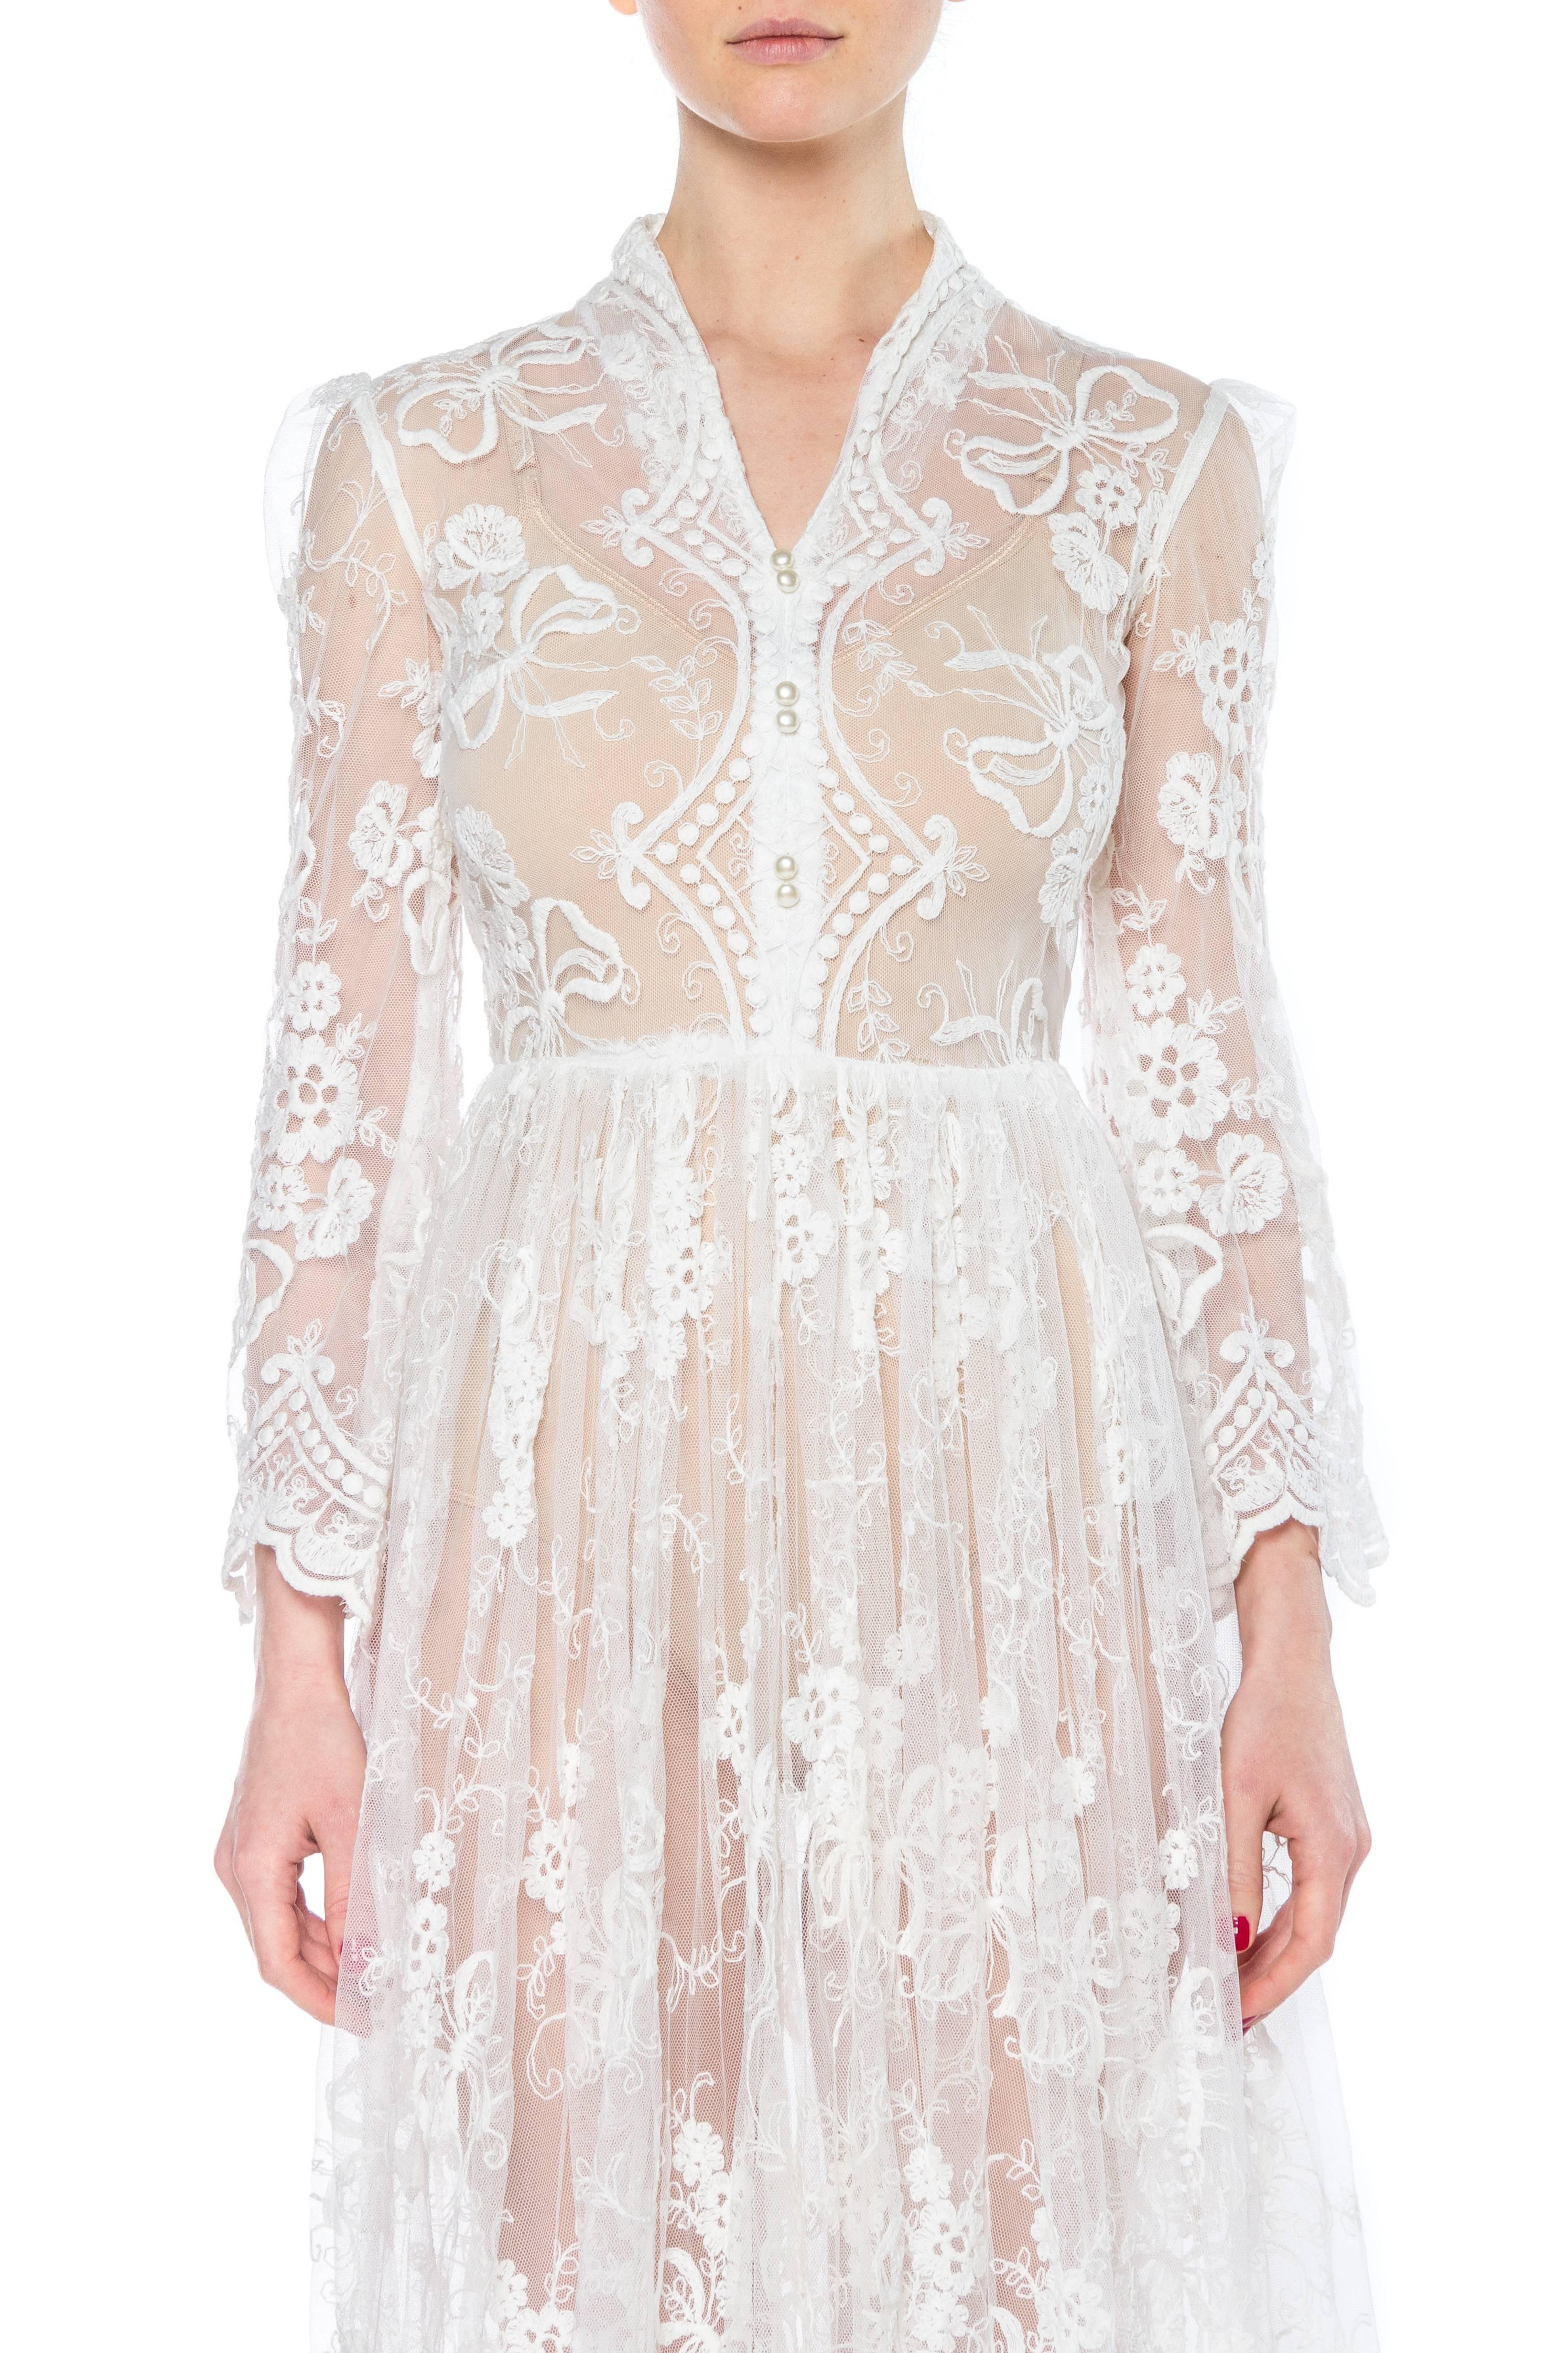 Floral Embroidered Net Lace Dress with Sleeves 3